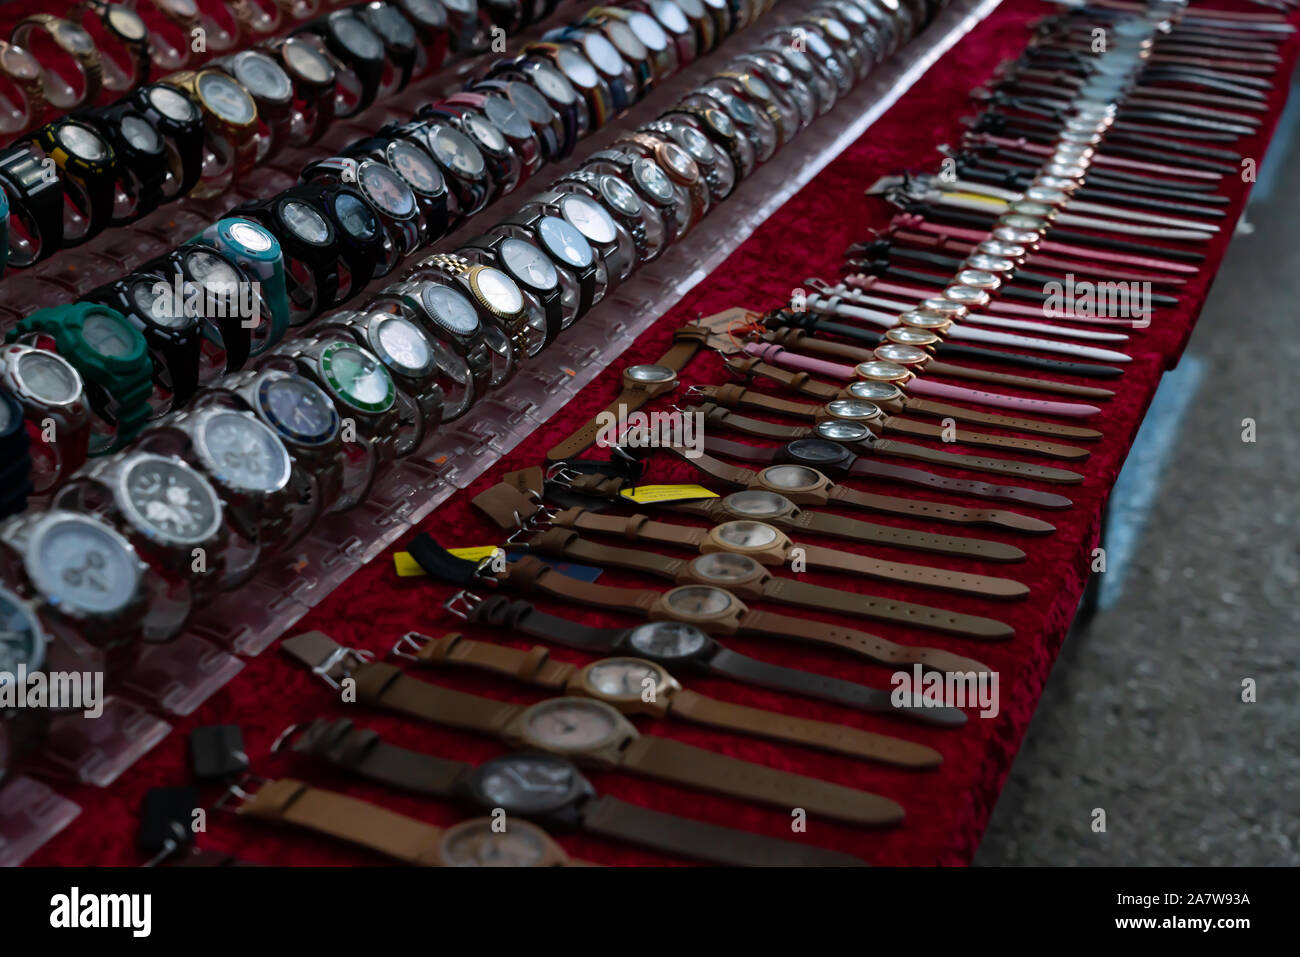 View of several elegant wristwatches in a market stall, at the local Saturday street market Stock Photo